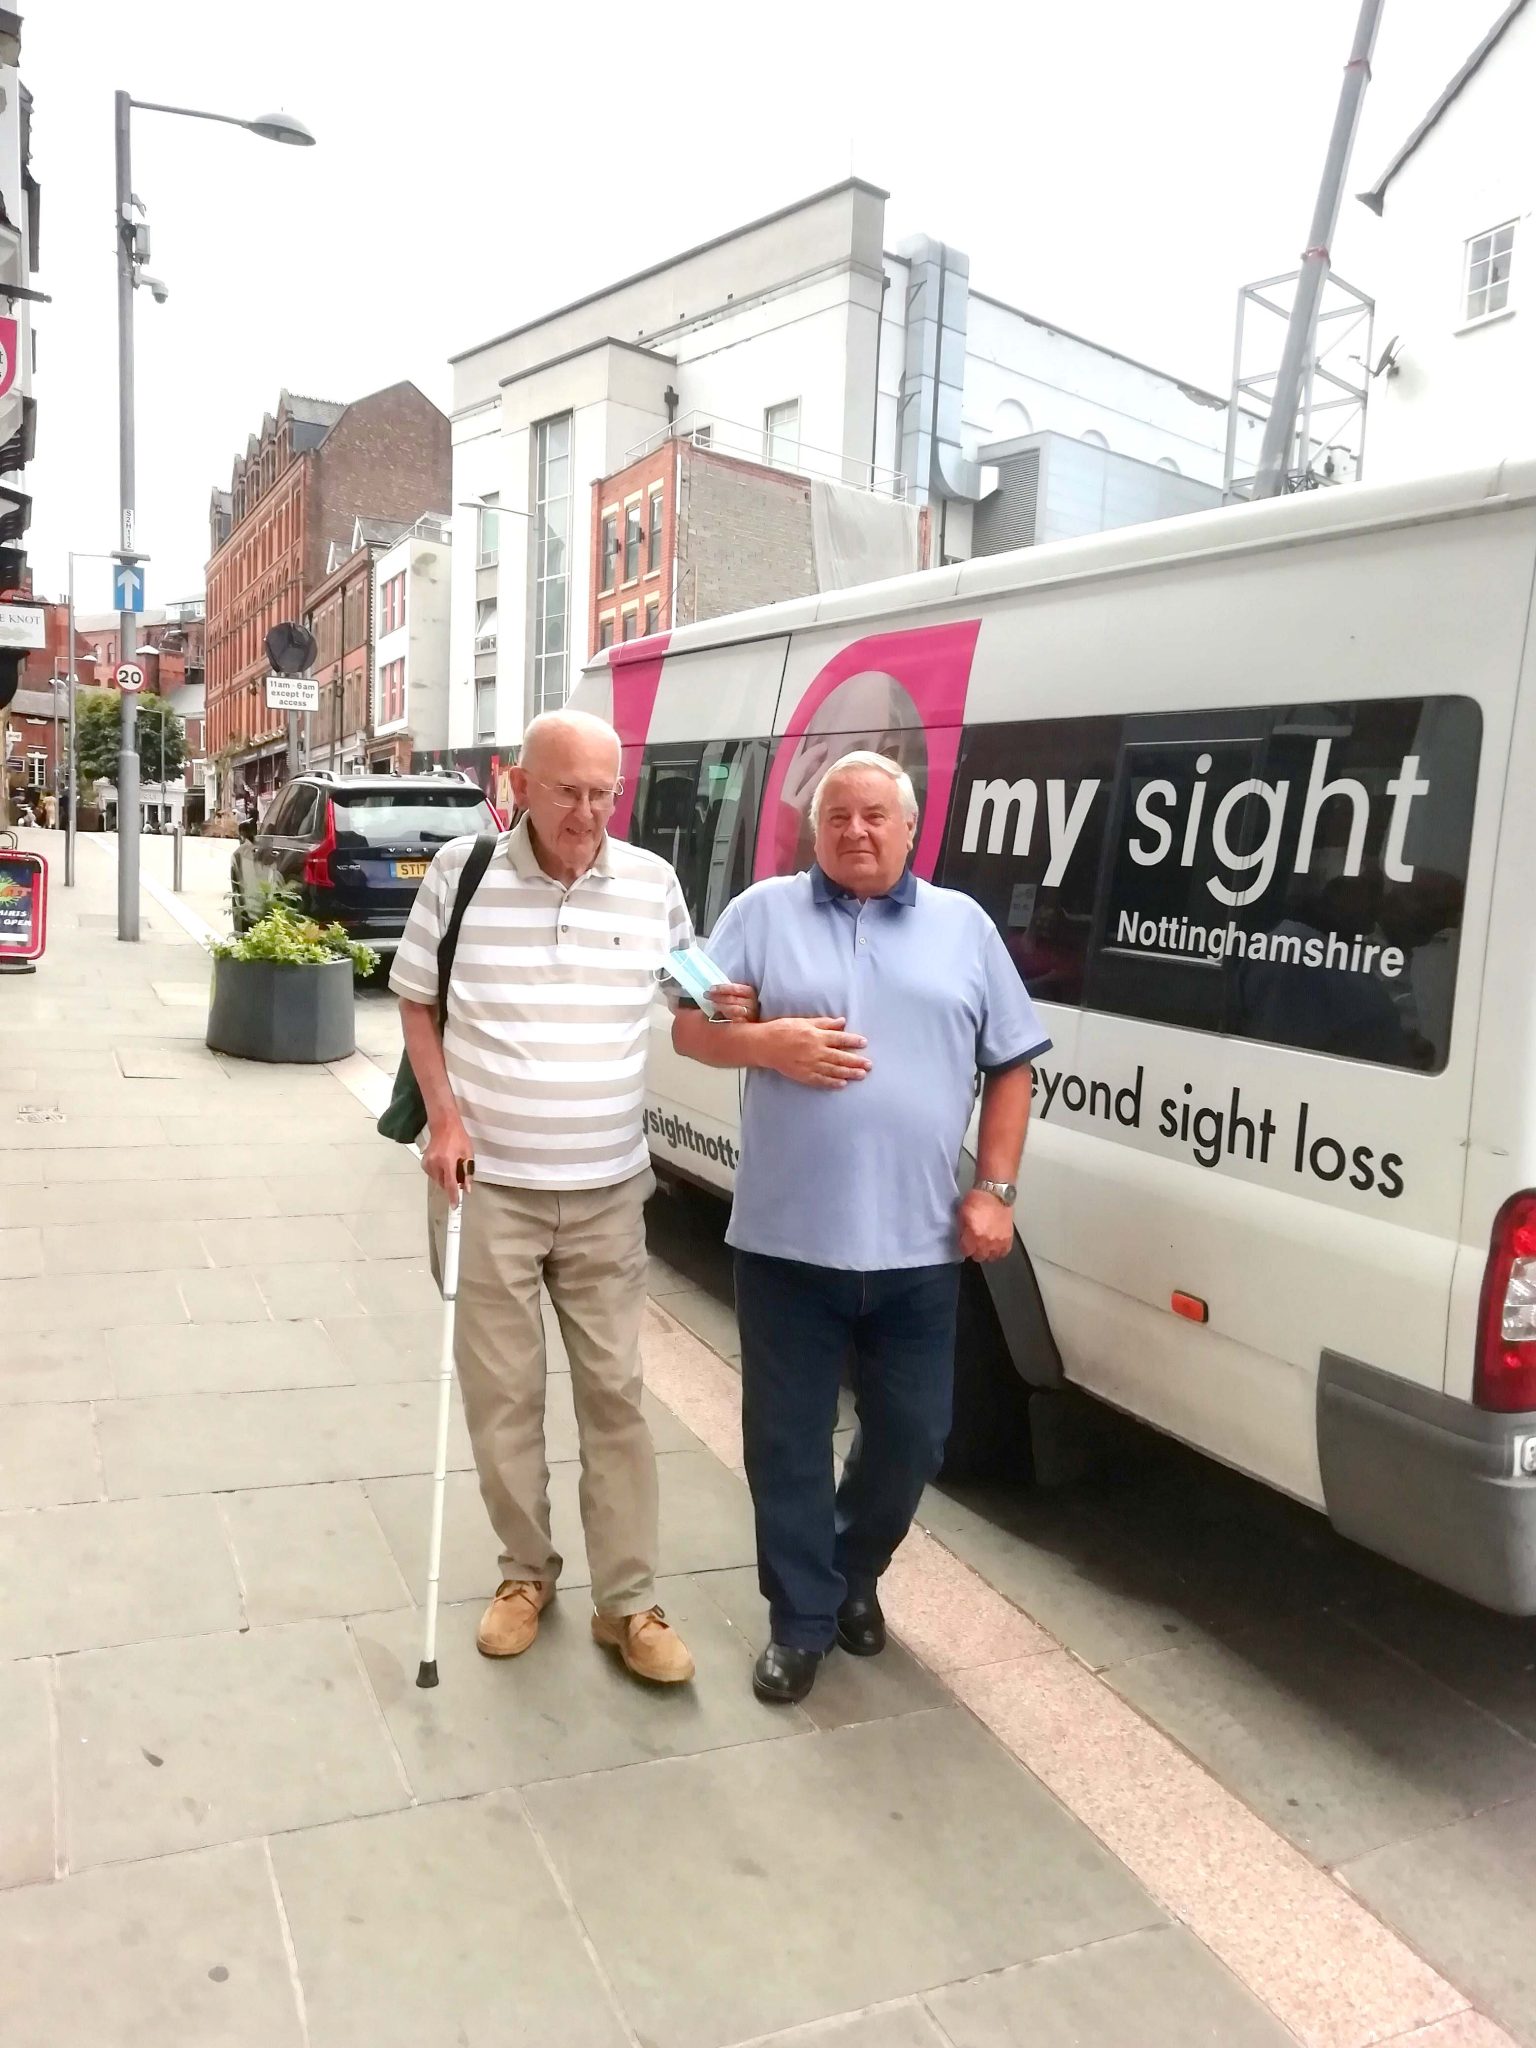 Image above shows a male volunteer sighted guide assisting a man with a white walking stick